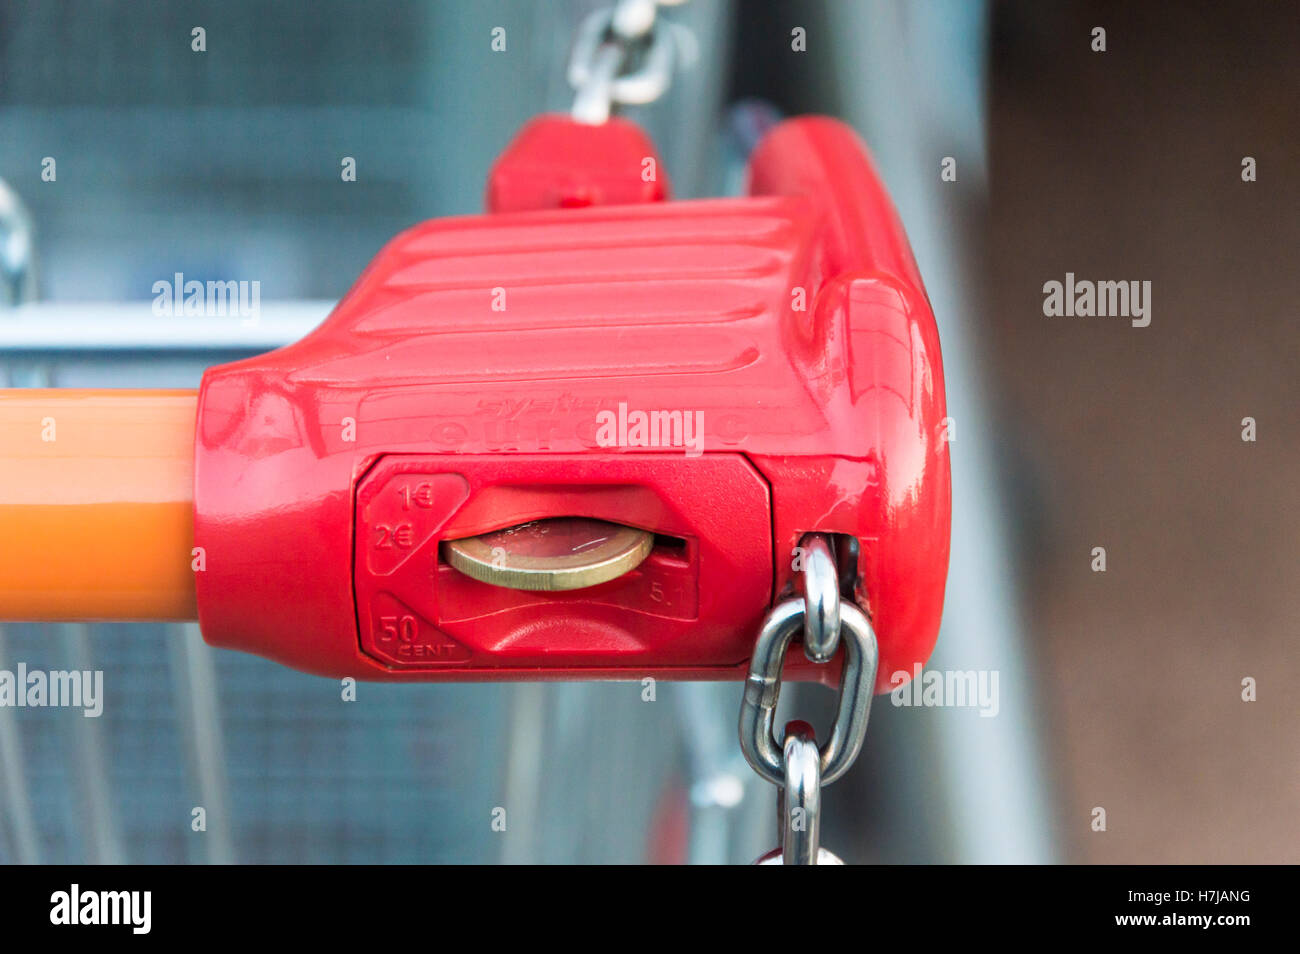 Forli, Italy - 30th October 2016: Detail of a shopping cart locking system, with 1 euro coin inside Stock Photo